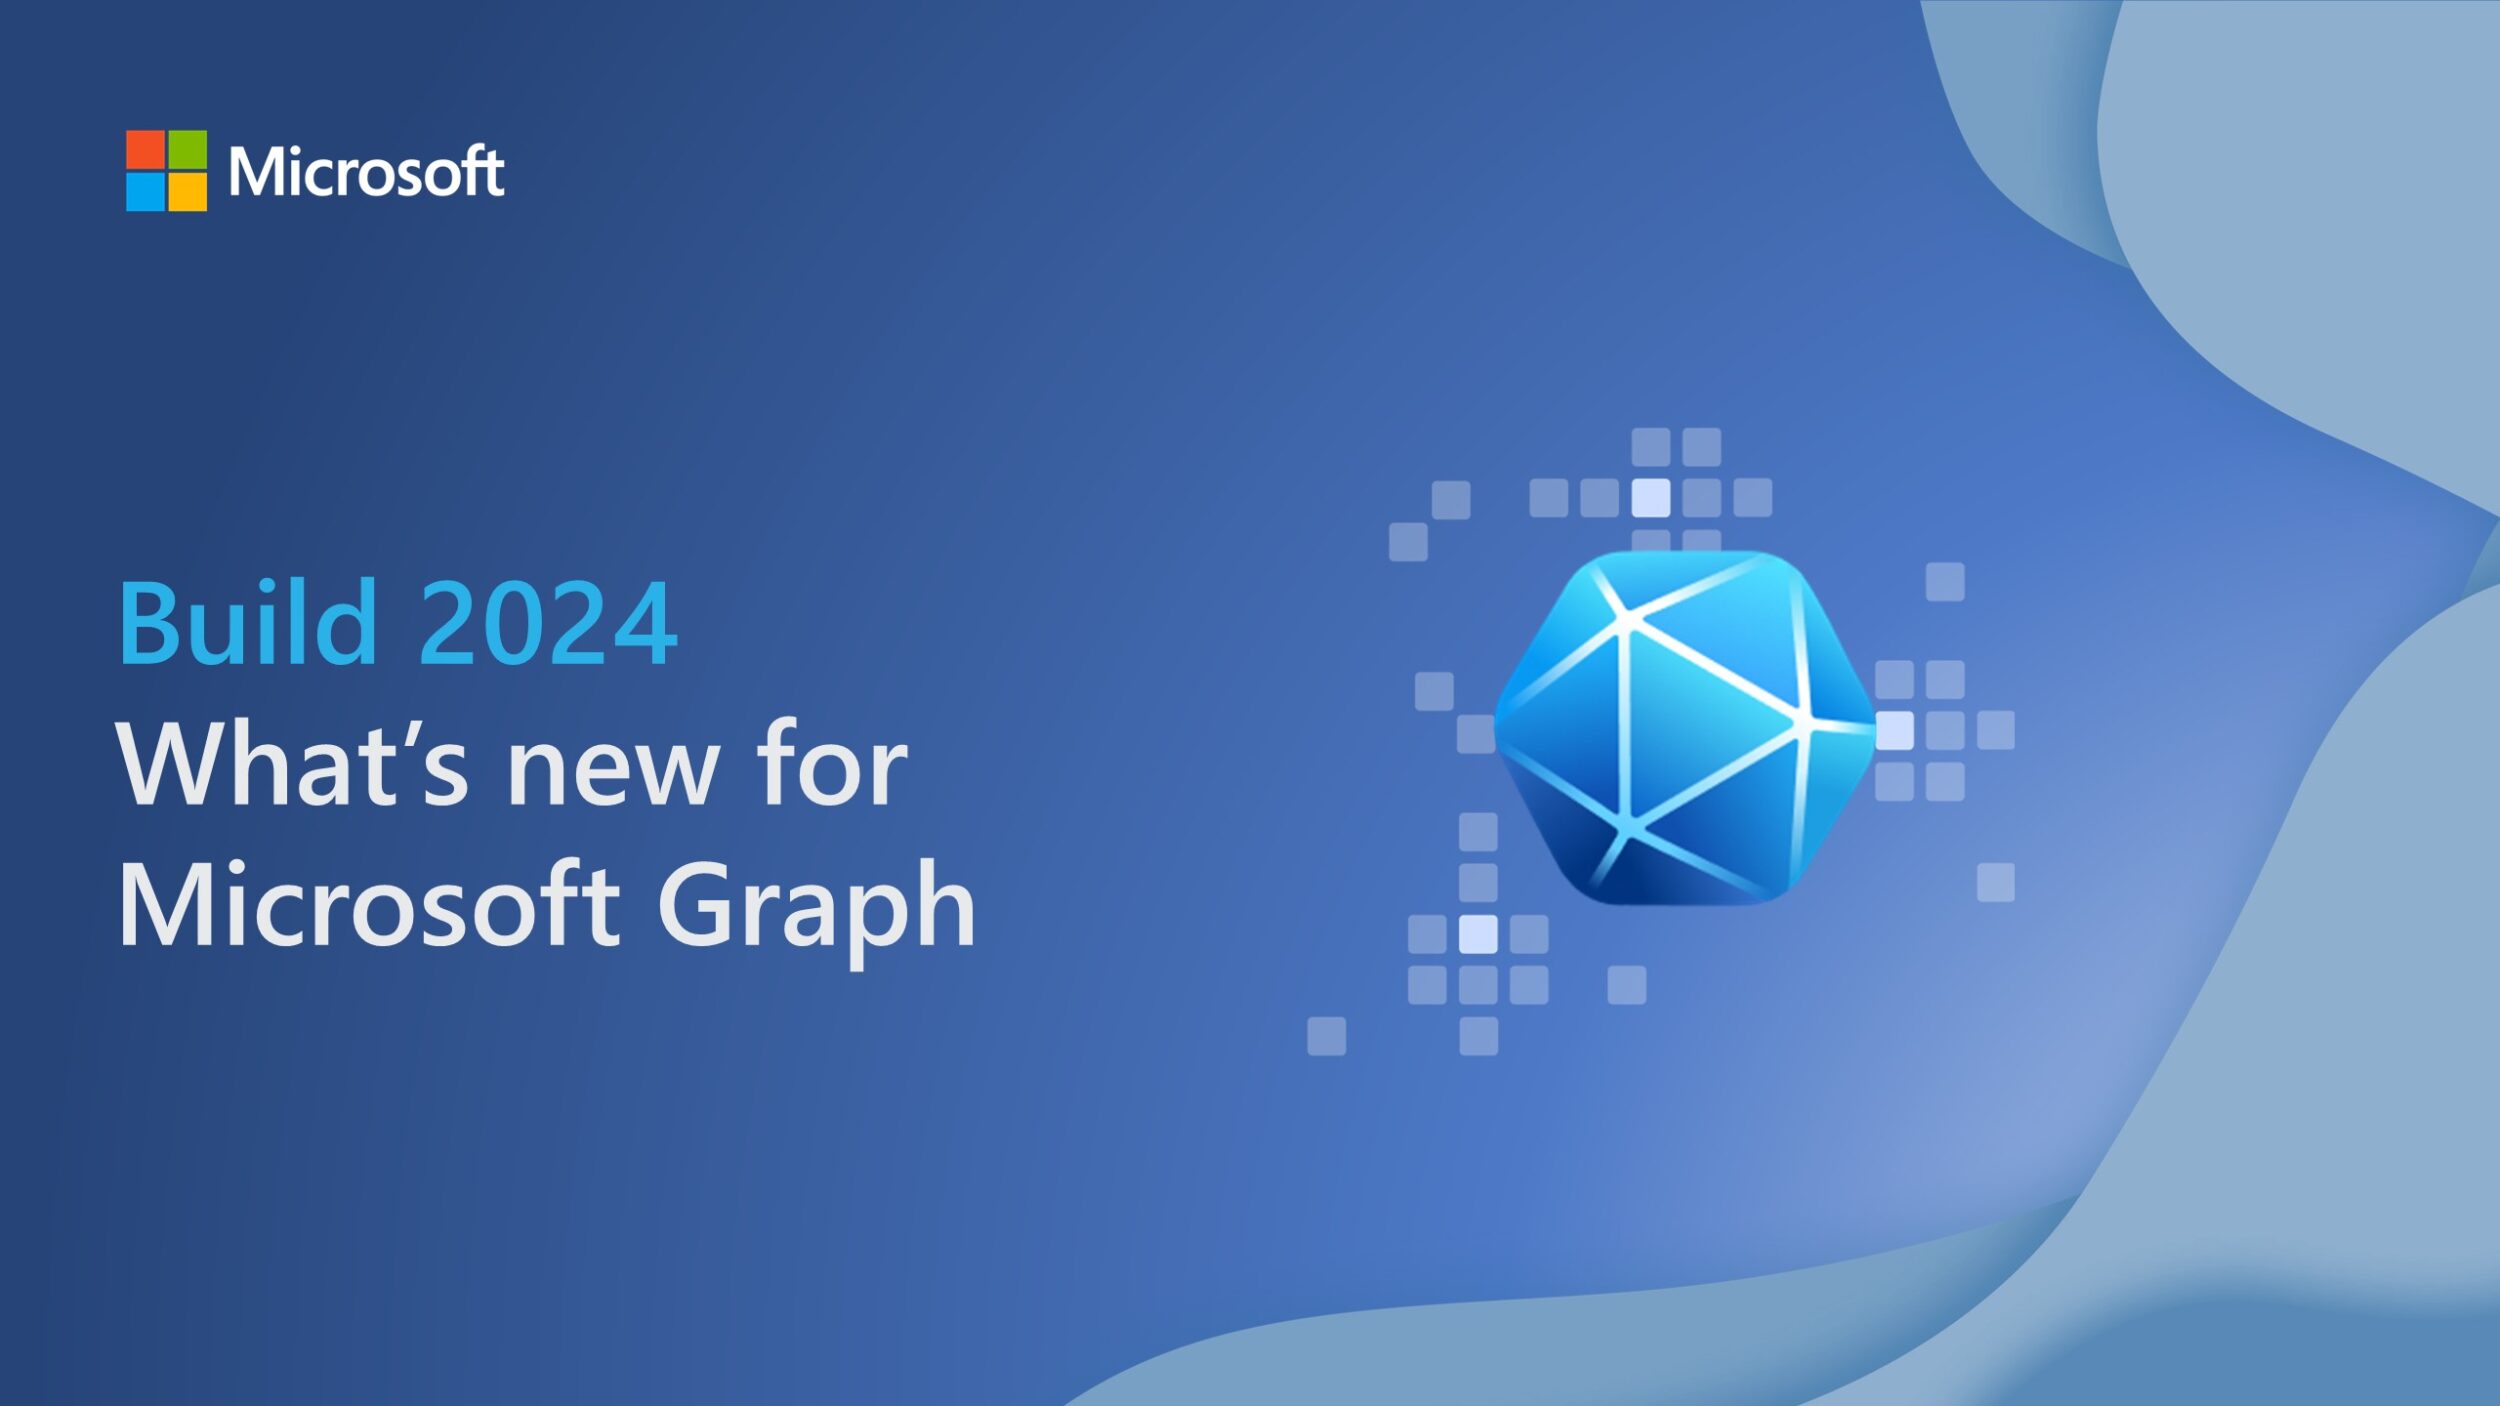 Build 2024: What’s new for Microsoft Graph